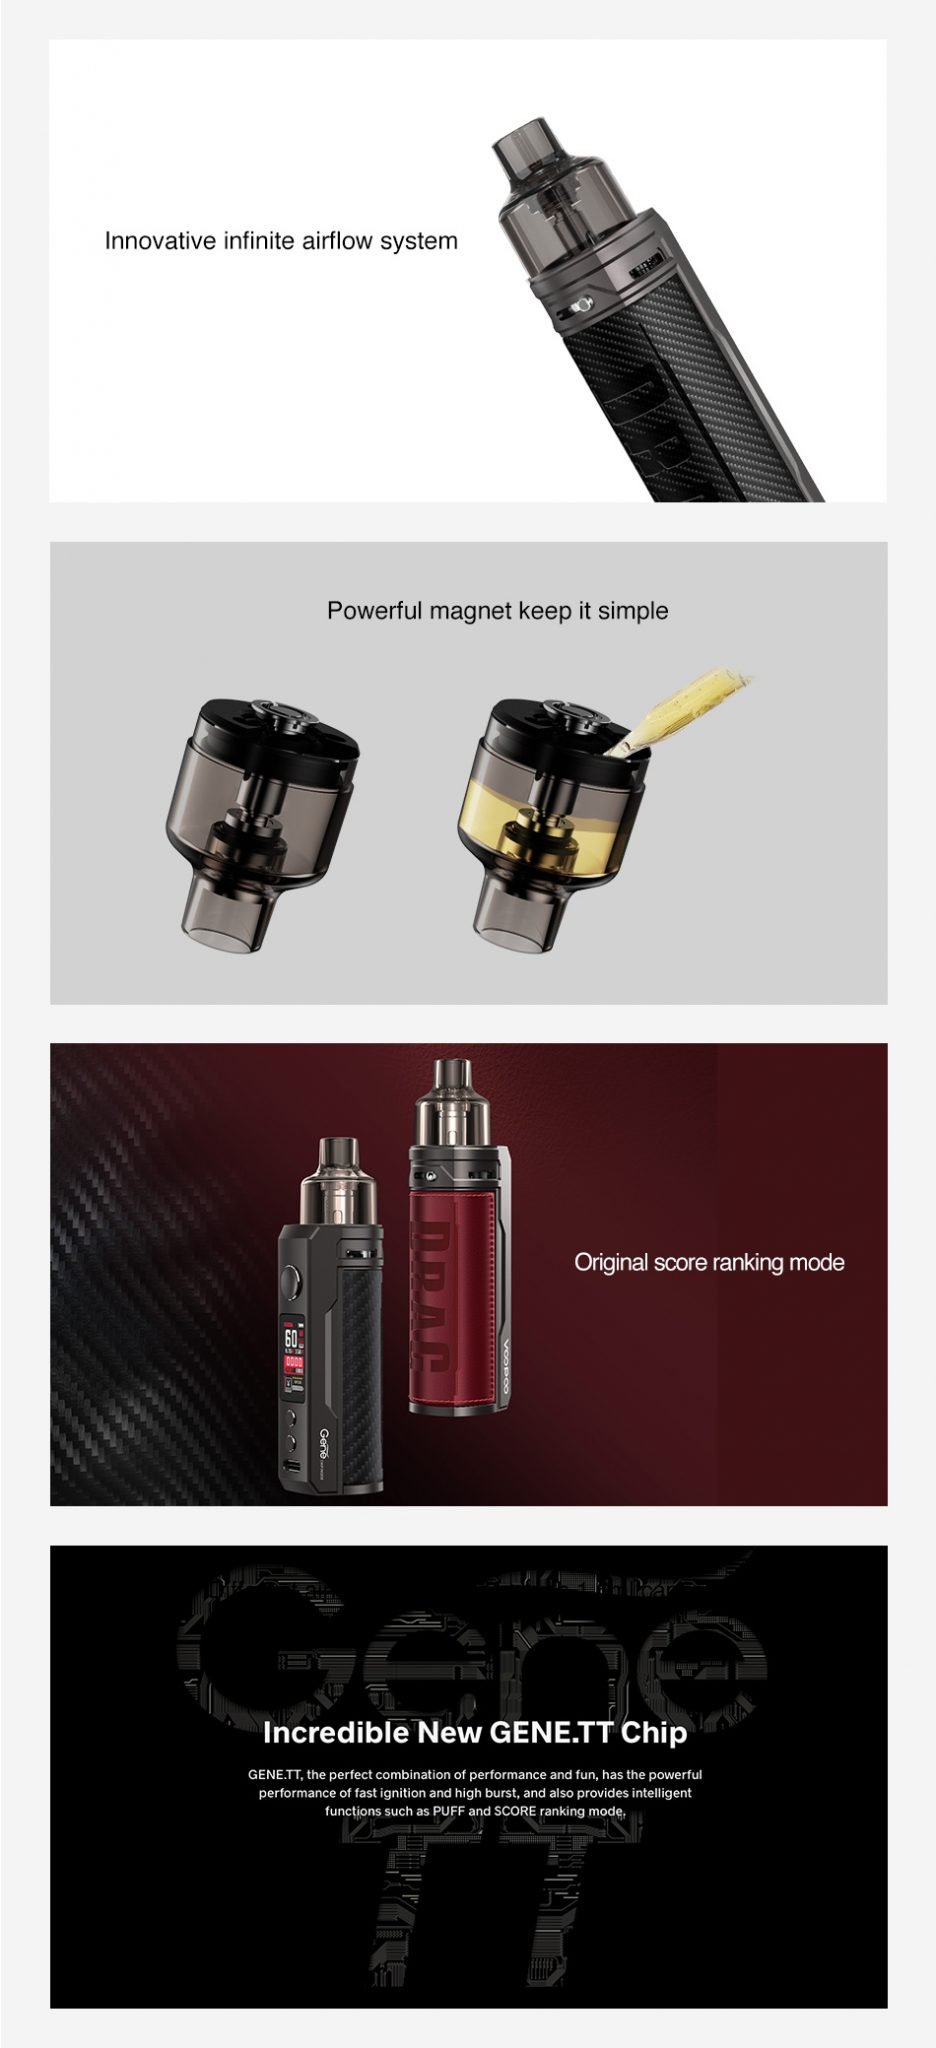 Voopoo Drag S Pod Features UK: Image Text: Innovative infinite airflow system, powerful magnet - keep it simple, original score ranking mode, Incredible New GENE.TT Chip: GENE.TT, the perfect combination of performance and fun, has the powerful performance of fast ignition and high burst, and also provides intelligent functions such as PUFF and SCORE ranking mode.